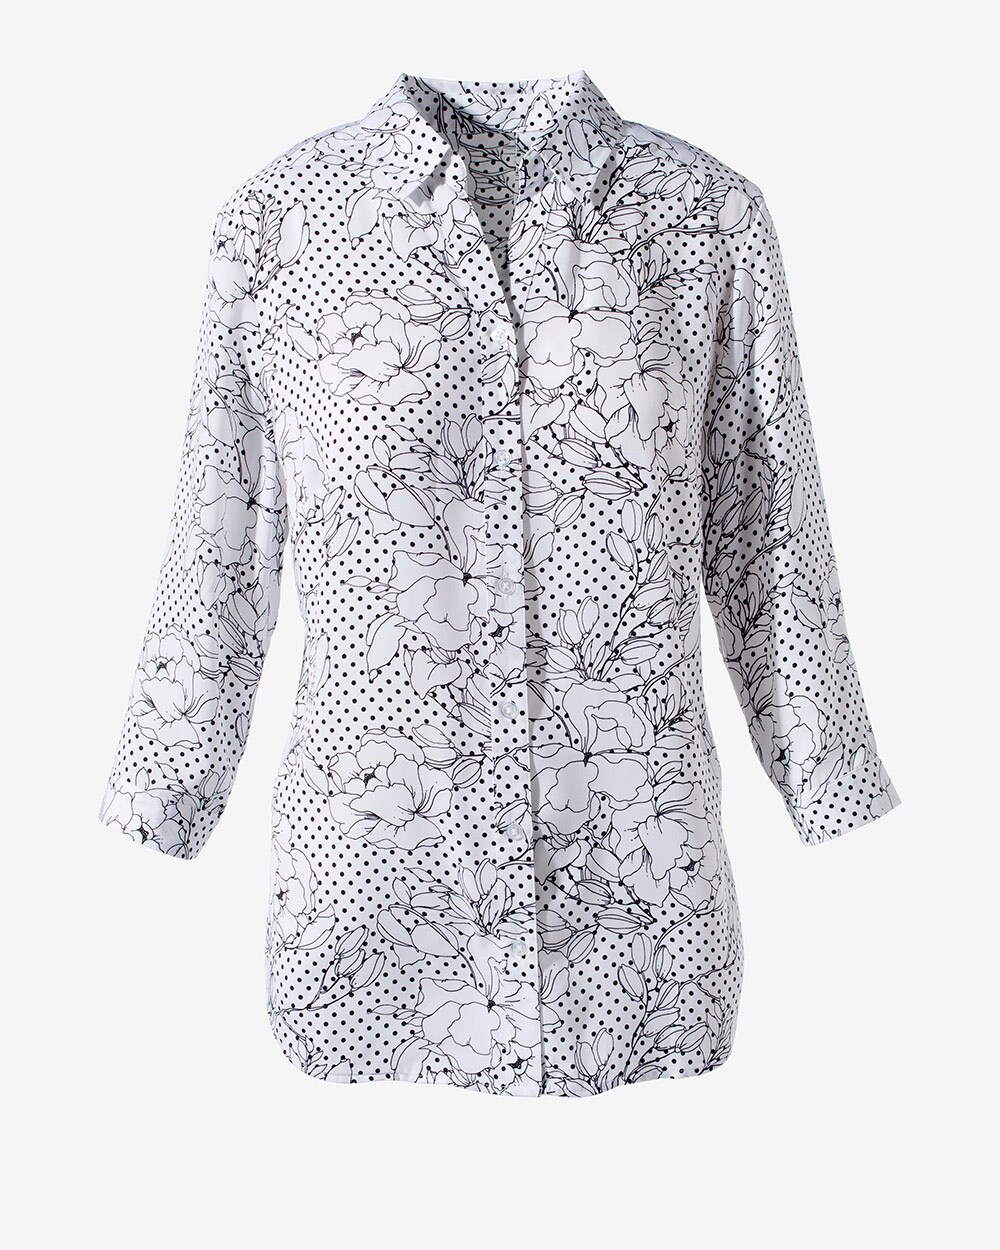 The Silky Chic Etched Floral Dot Shirt